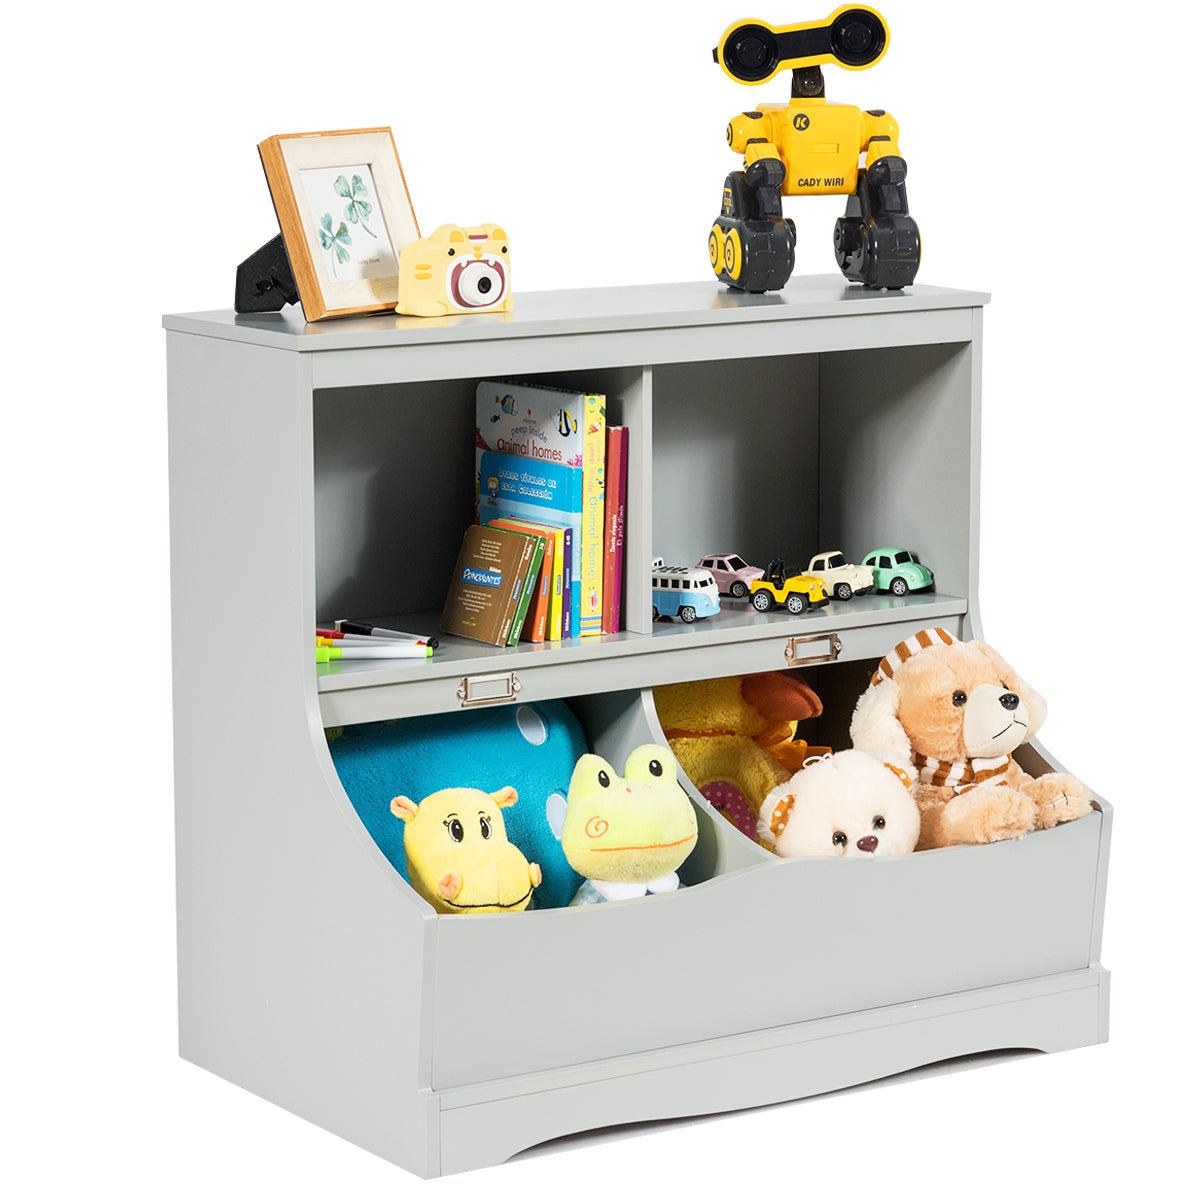 Kid's Room Storage Made Easy - Grey 2 Tier Toy Shelf with Lacquer